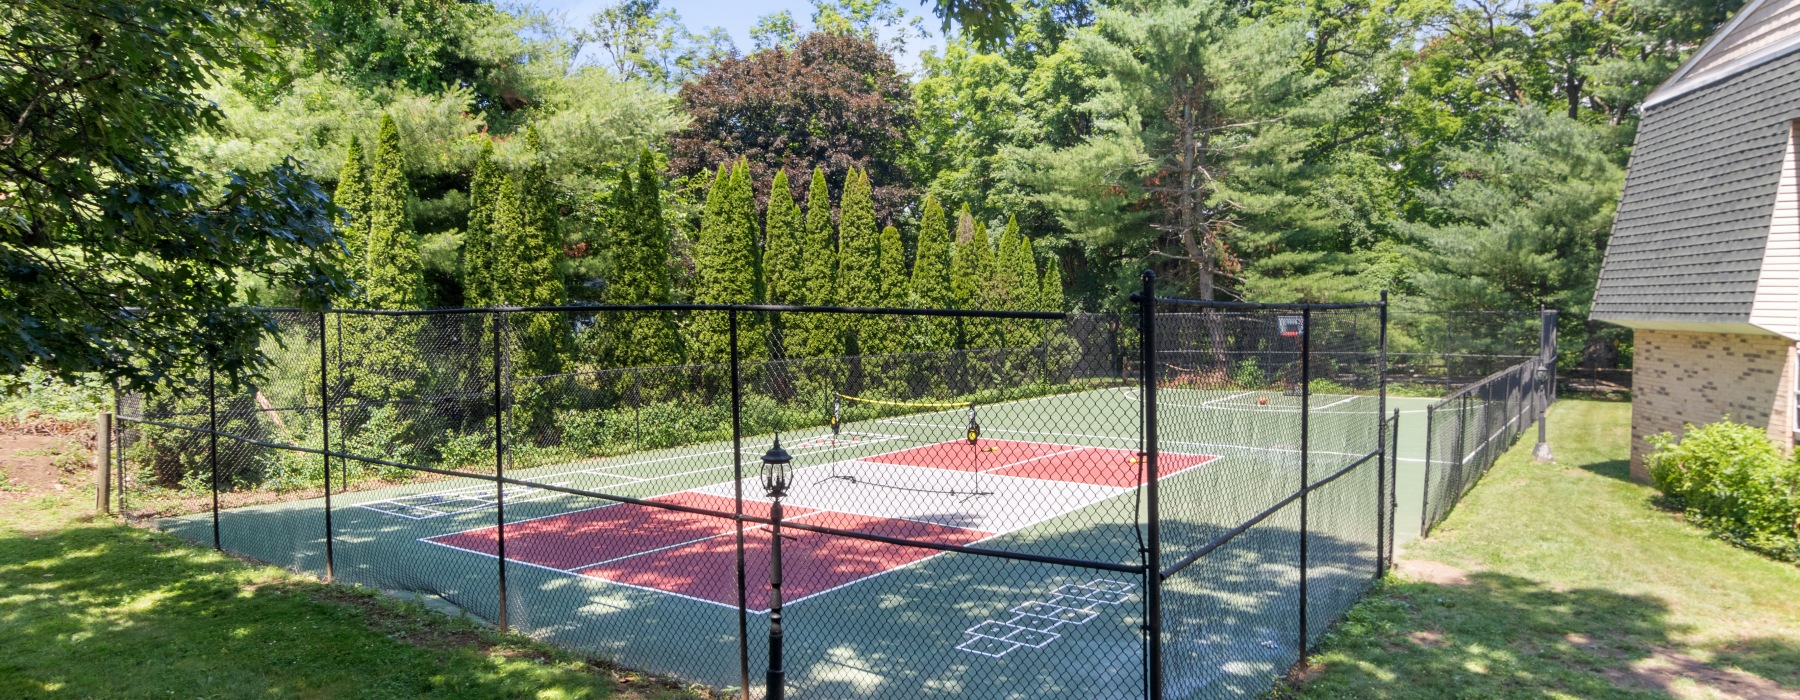 View of fenced sport court with lush landscaping surrounding 